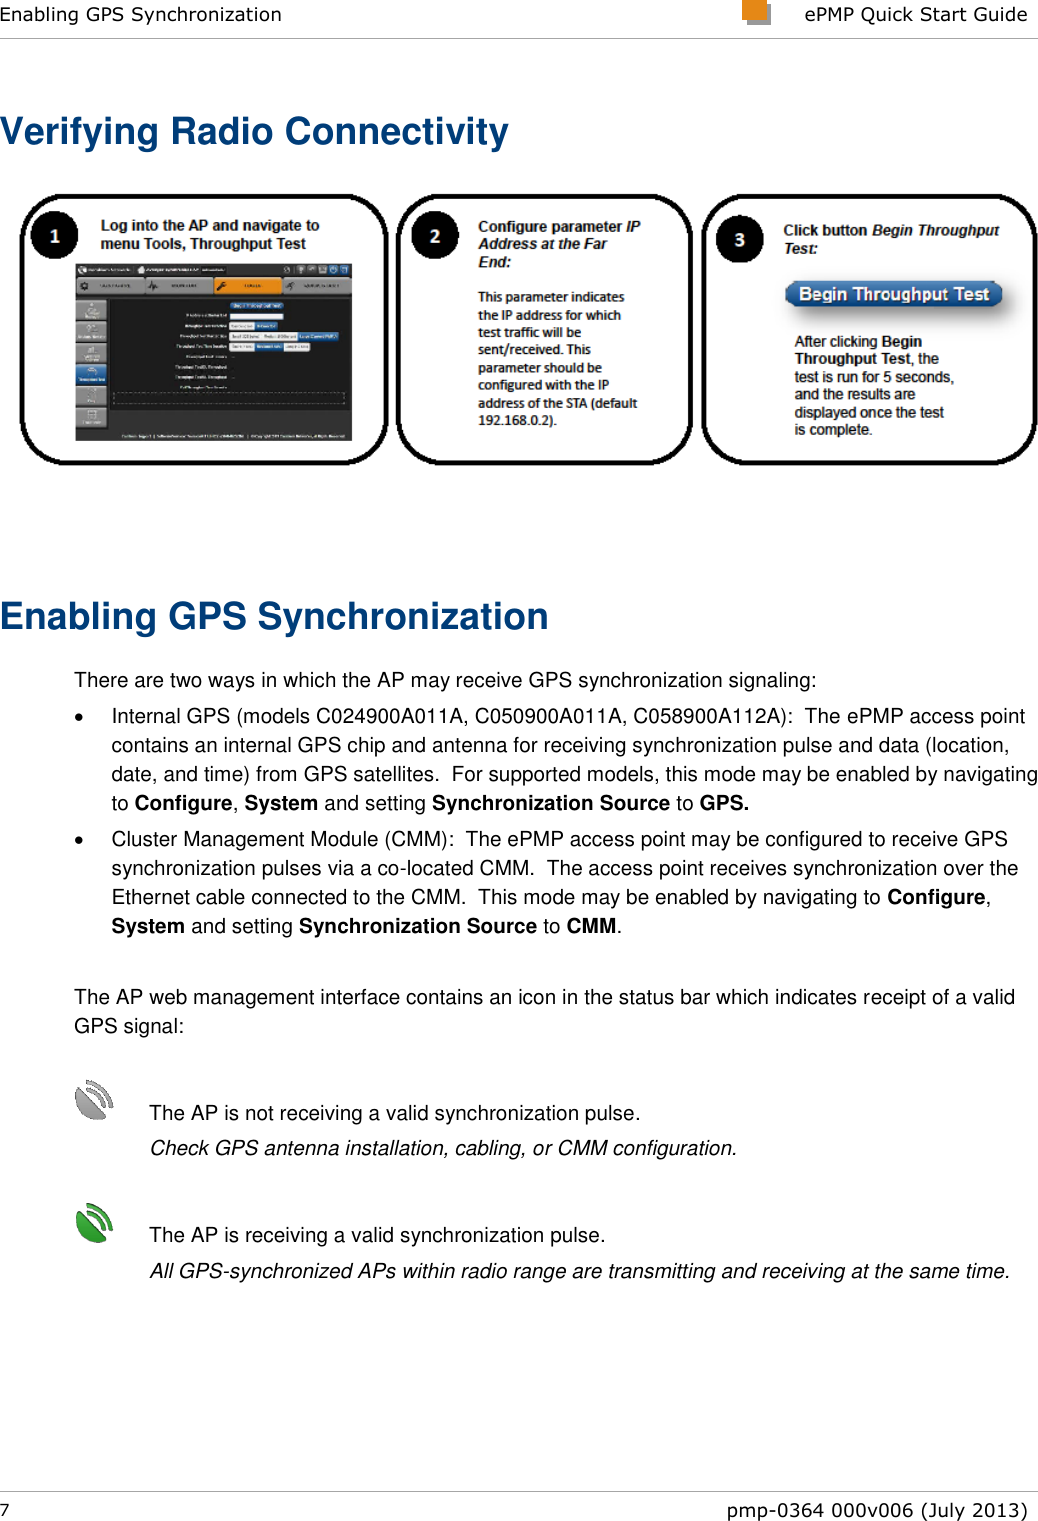 Enabling GPS Synchronization     ePMP Quick Start Guide  7  pmp-0364 000v006 (July 2013)  Verifying Radio Connectivity  Enabling GPS Synchronization There are two ways in which the AP may receive GPS synchronization signaling:   Internal GPS (models C024900A011A, C050900A011A, C058900A112A):  The ePMP access point contains an internal GPS chip and antenna for receiving synchronization pulse and data (location, date, and time) from GPS satellites.  For supported models, this mode may be enabled by navigating to Configure, System and setting Synchronization Source to GPS.   Cluster Management Module (CMM):  The ePMP access point may be configured to receive GPS synchronization pulses via a co-located CMM.  The access point receives synchronization over the Ethernet cable connected to the CMM.  This mode may be enabled by navigating to Configure, System and setting Synchronization Source to CMM.  The AP web management interface contains an icon in the status bar which indicates receipt of a valid GPS signal:     The AP is not receiving a valid synchronization pulse.  Check GPS antenna installation, cabling, or CMM configuration.        The AP is receiving a valid synchronization pulse.  All GPS-synchronized APs within radio range are transmitting and receiving at the same time. 